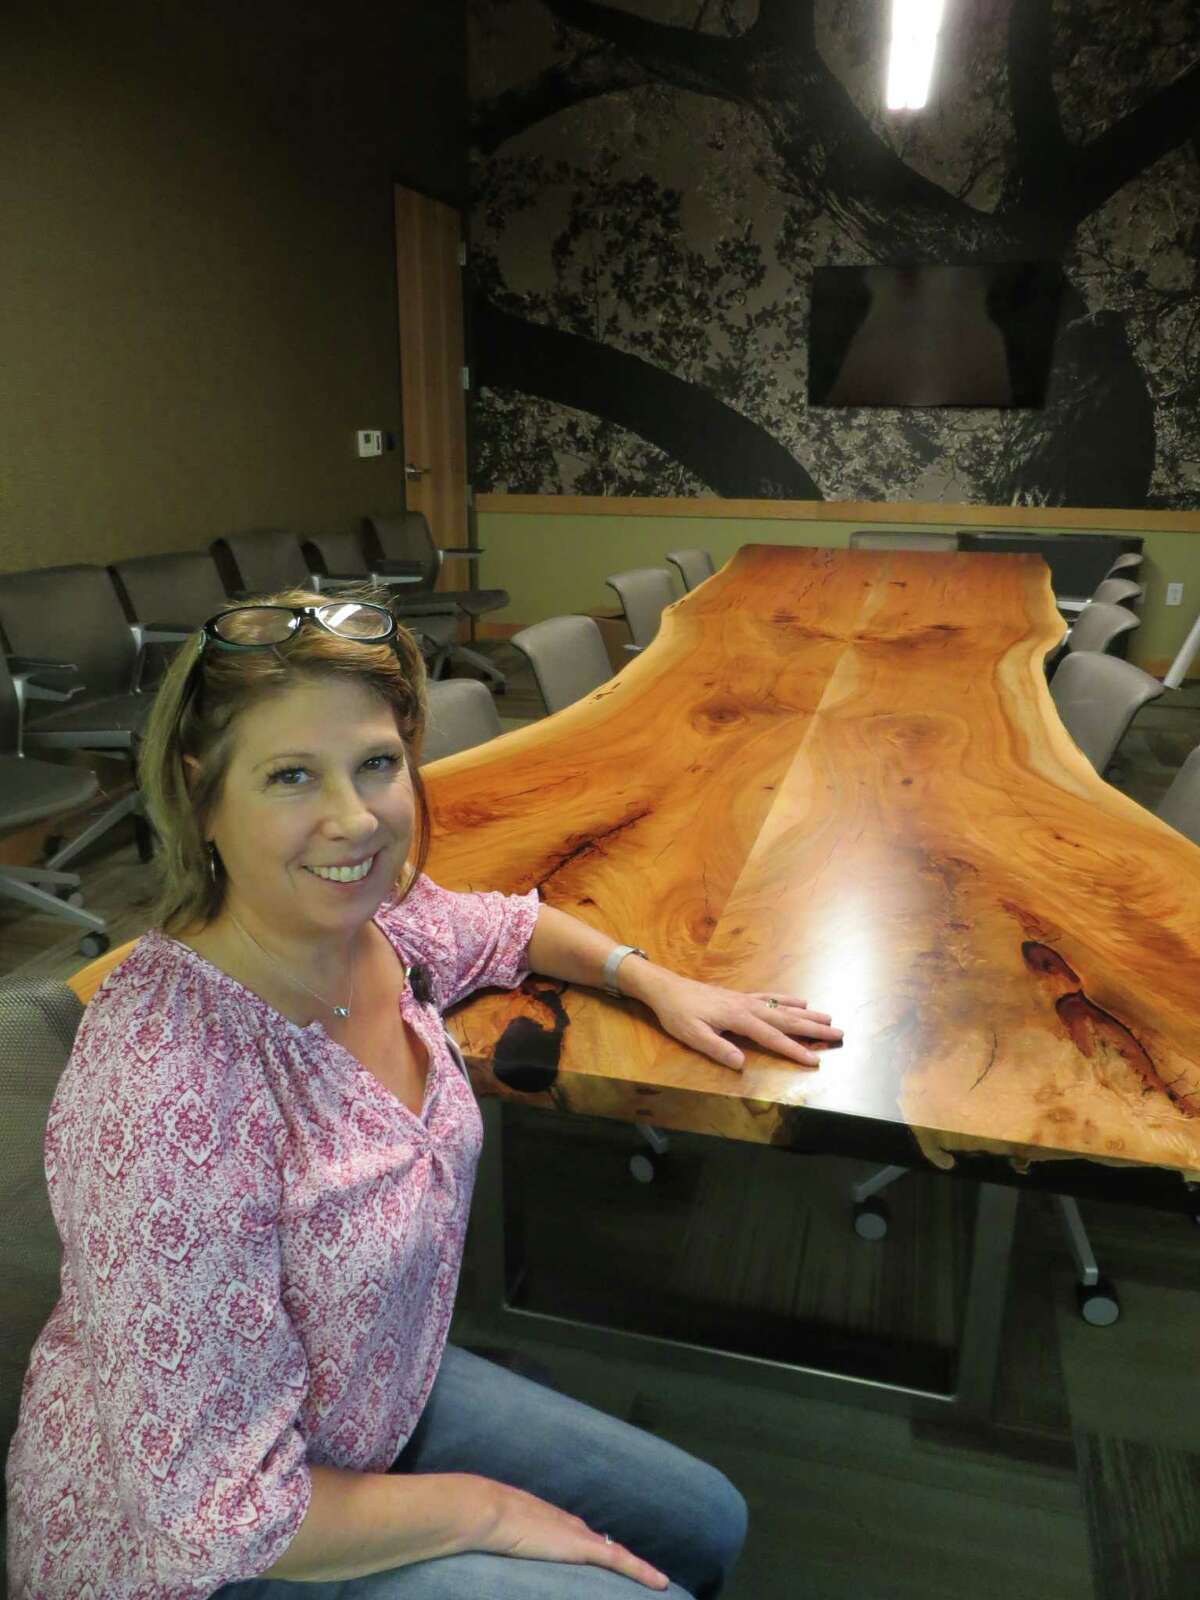 Pecan trees harvested on the site of the new Seguin Public Library were utilized to create wood paneling for the building's interior and benches and tables like the one shown here with Library Director Jacki Gross.